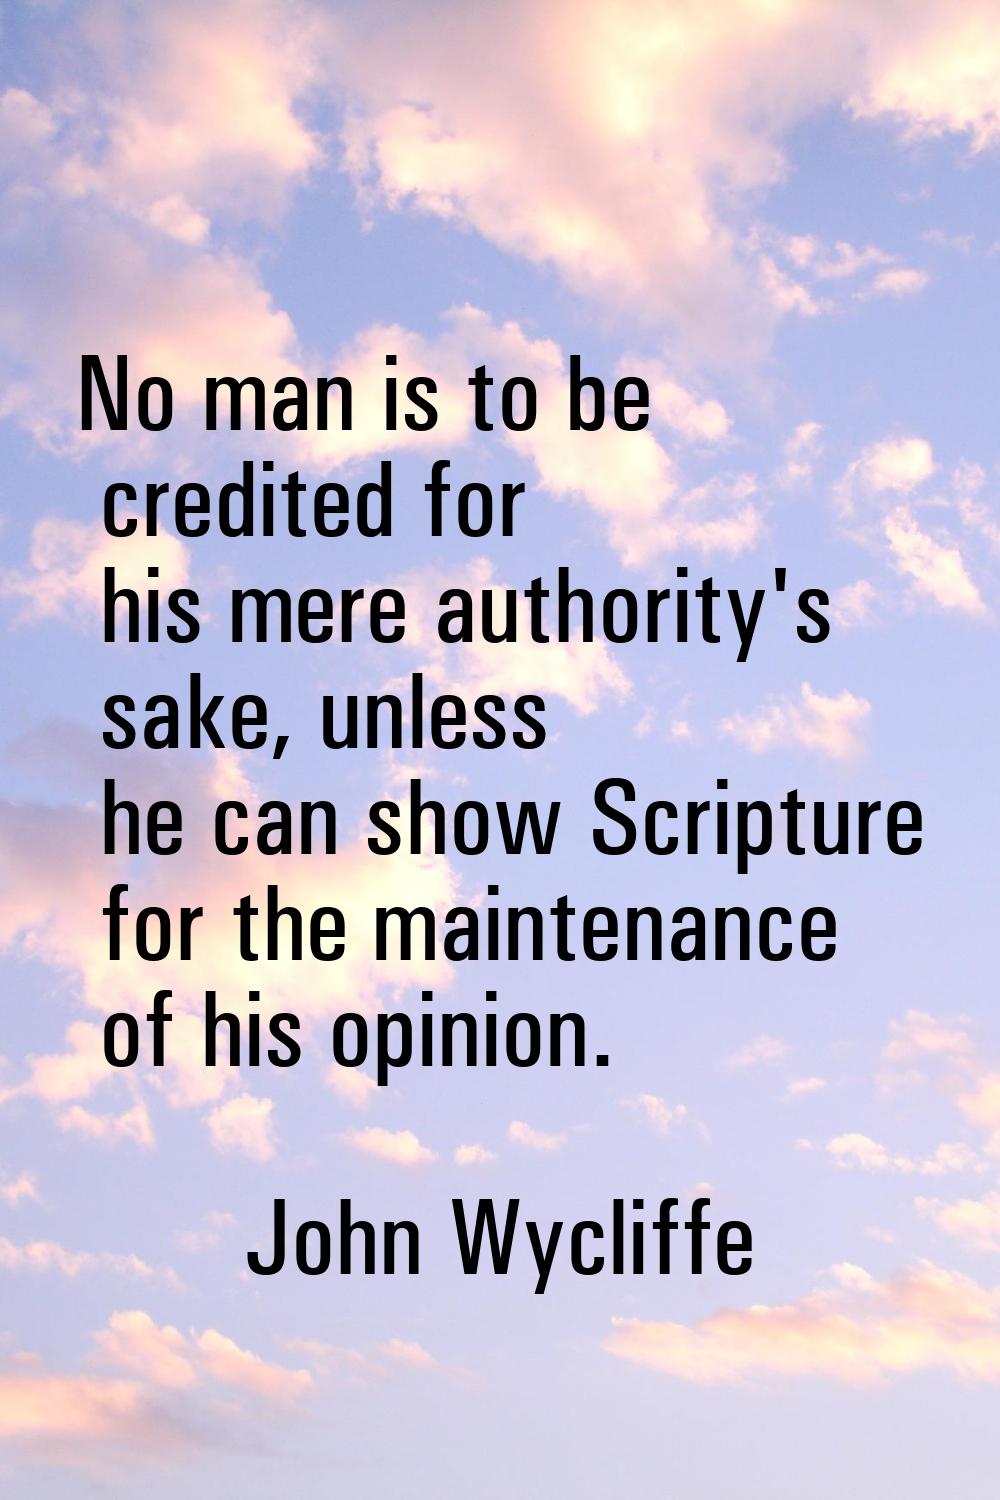 No man is to be credited for his mere authority's sake, unless he can show Scripture for the mainte